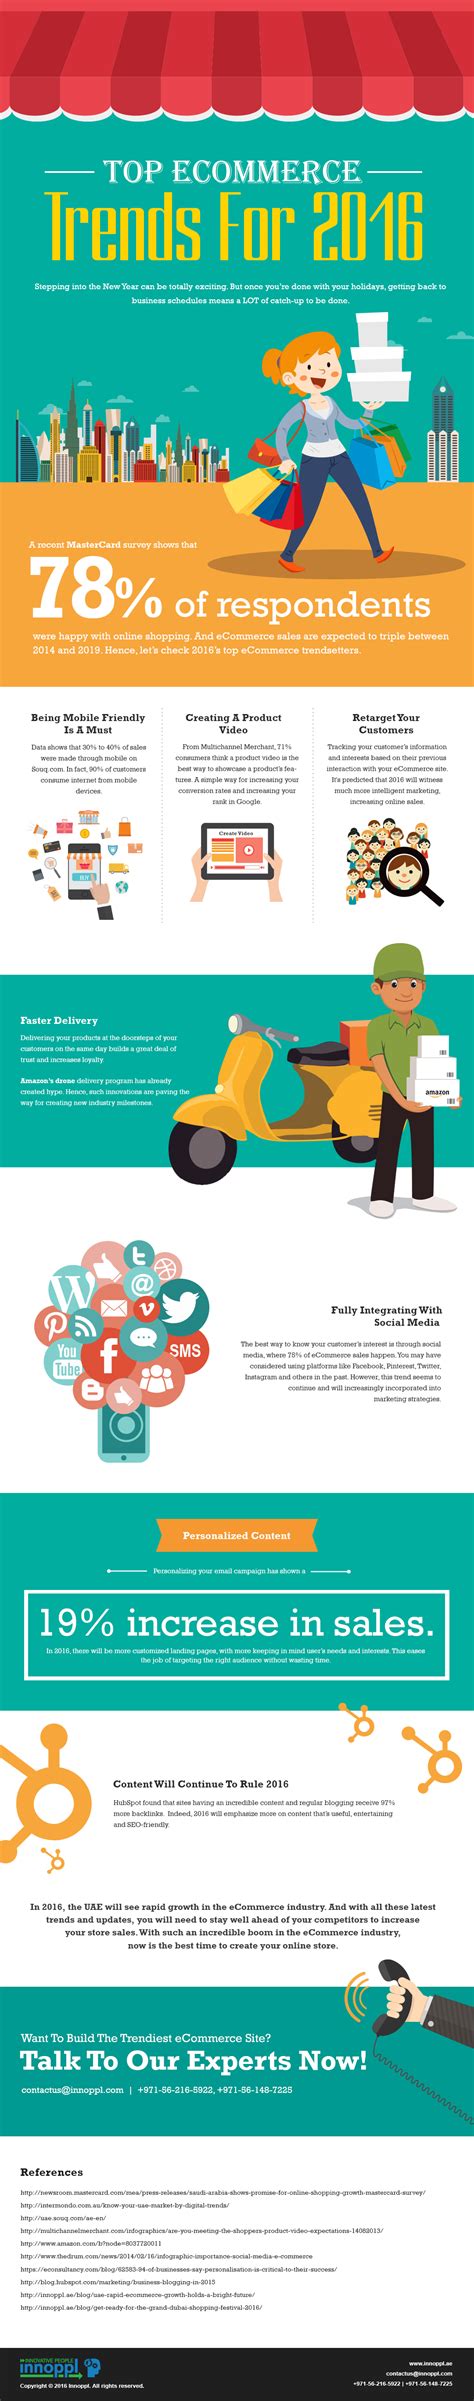 Top Ecommerce Trends For 2016 Infographic